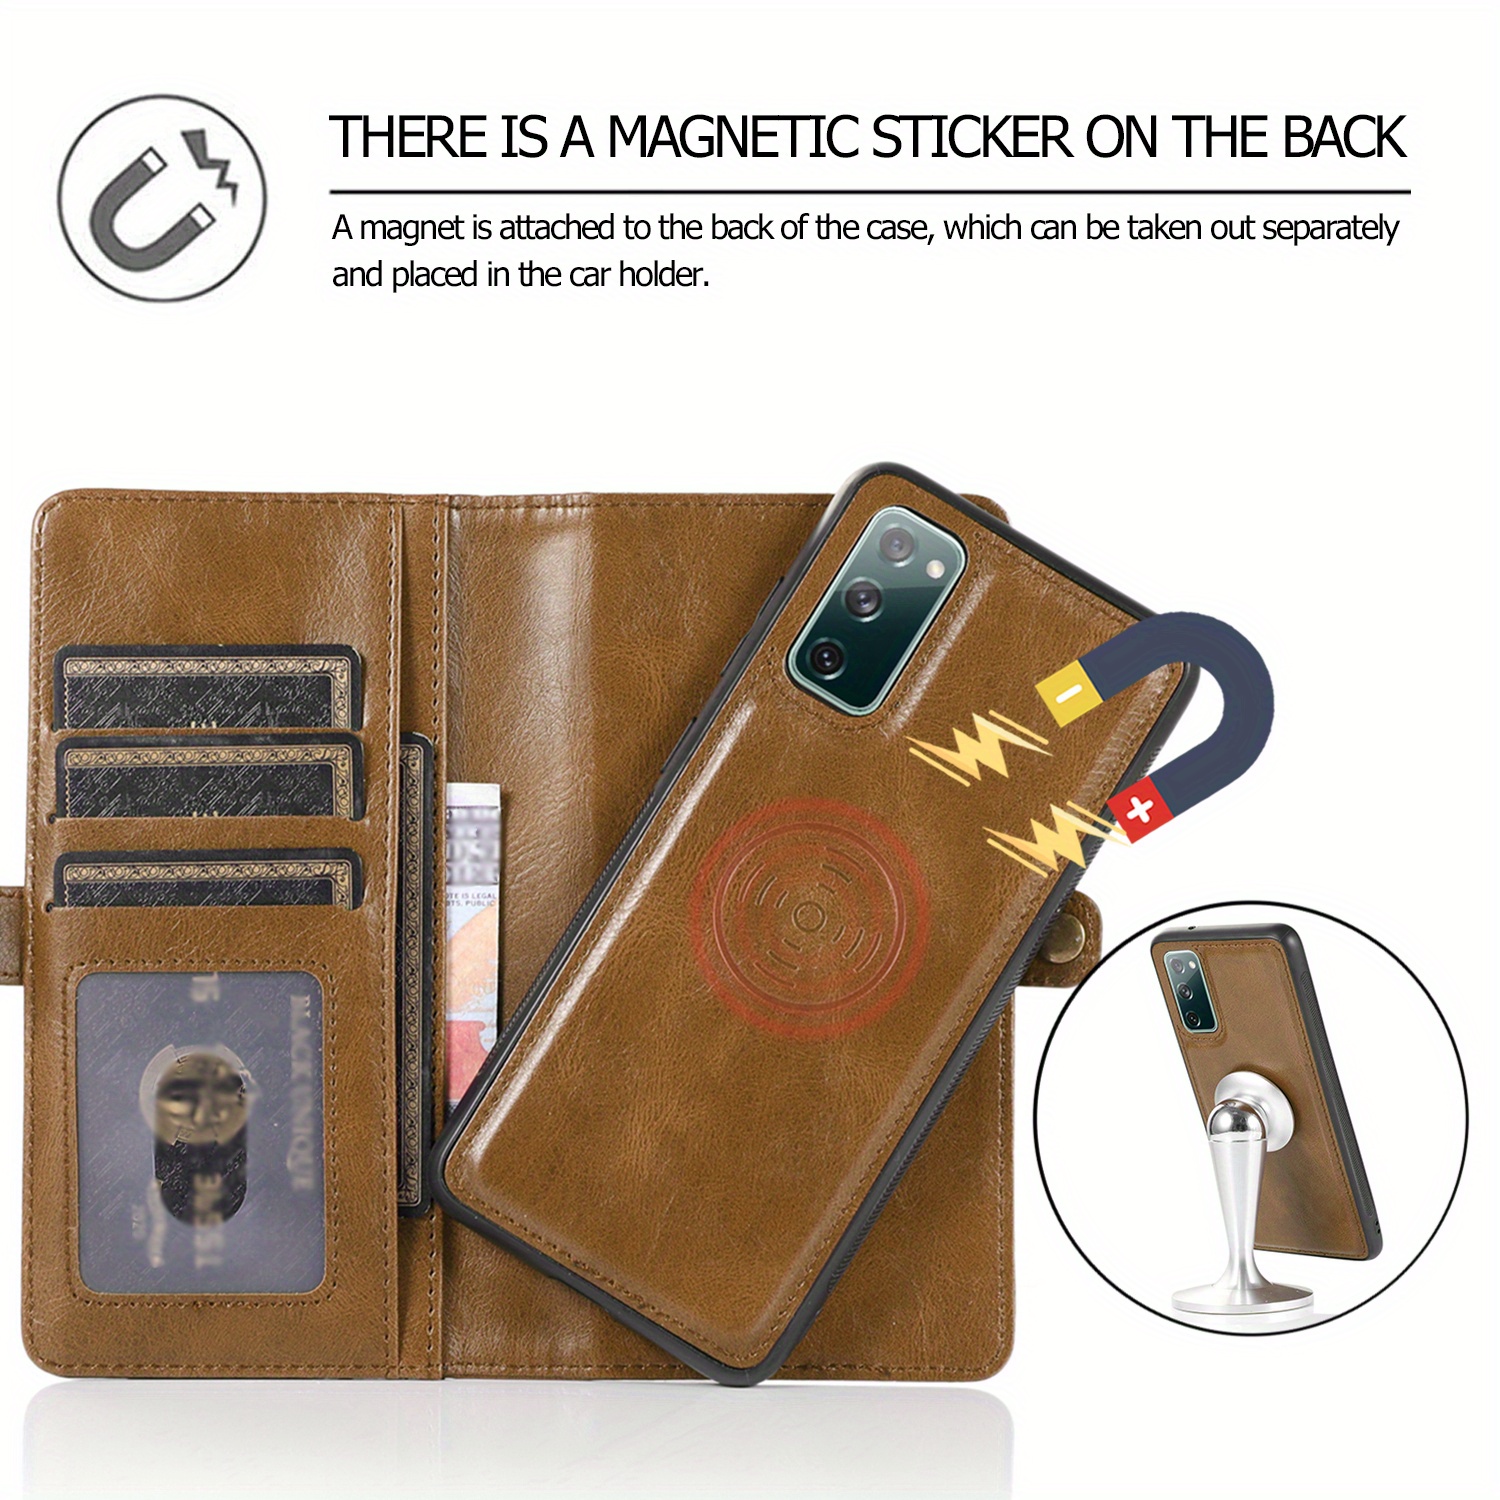 Tech Circle Wallet Case for Samsung Galaxy S23 Ultra,Double Magnetic Clasp Zipper Purse PU Leather Wallet Case with Credit Card Slot Holder Wrist